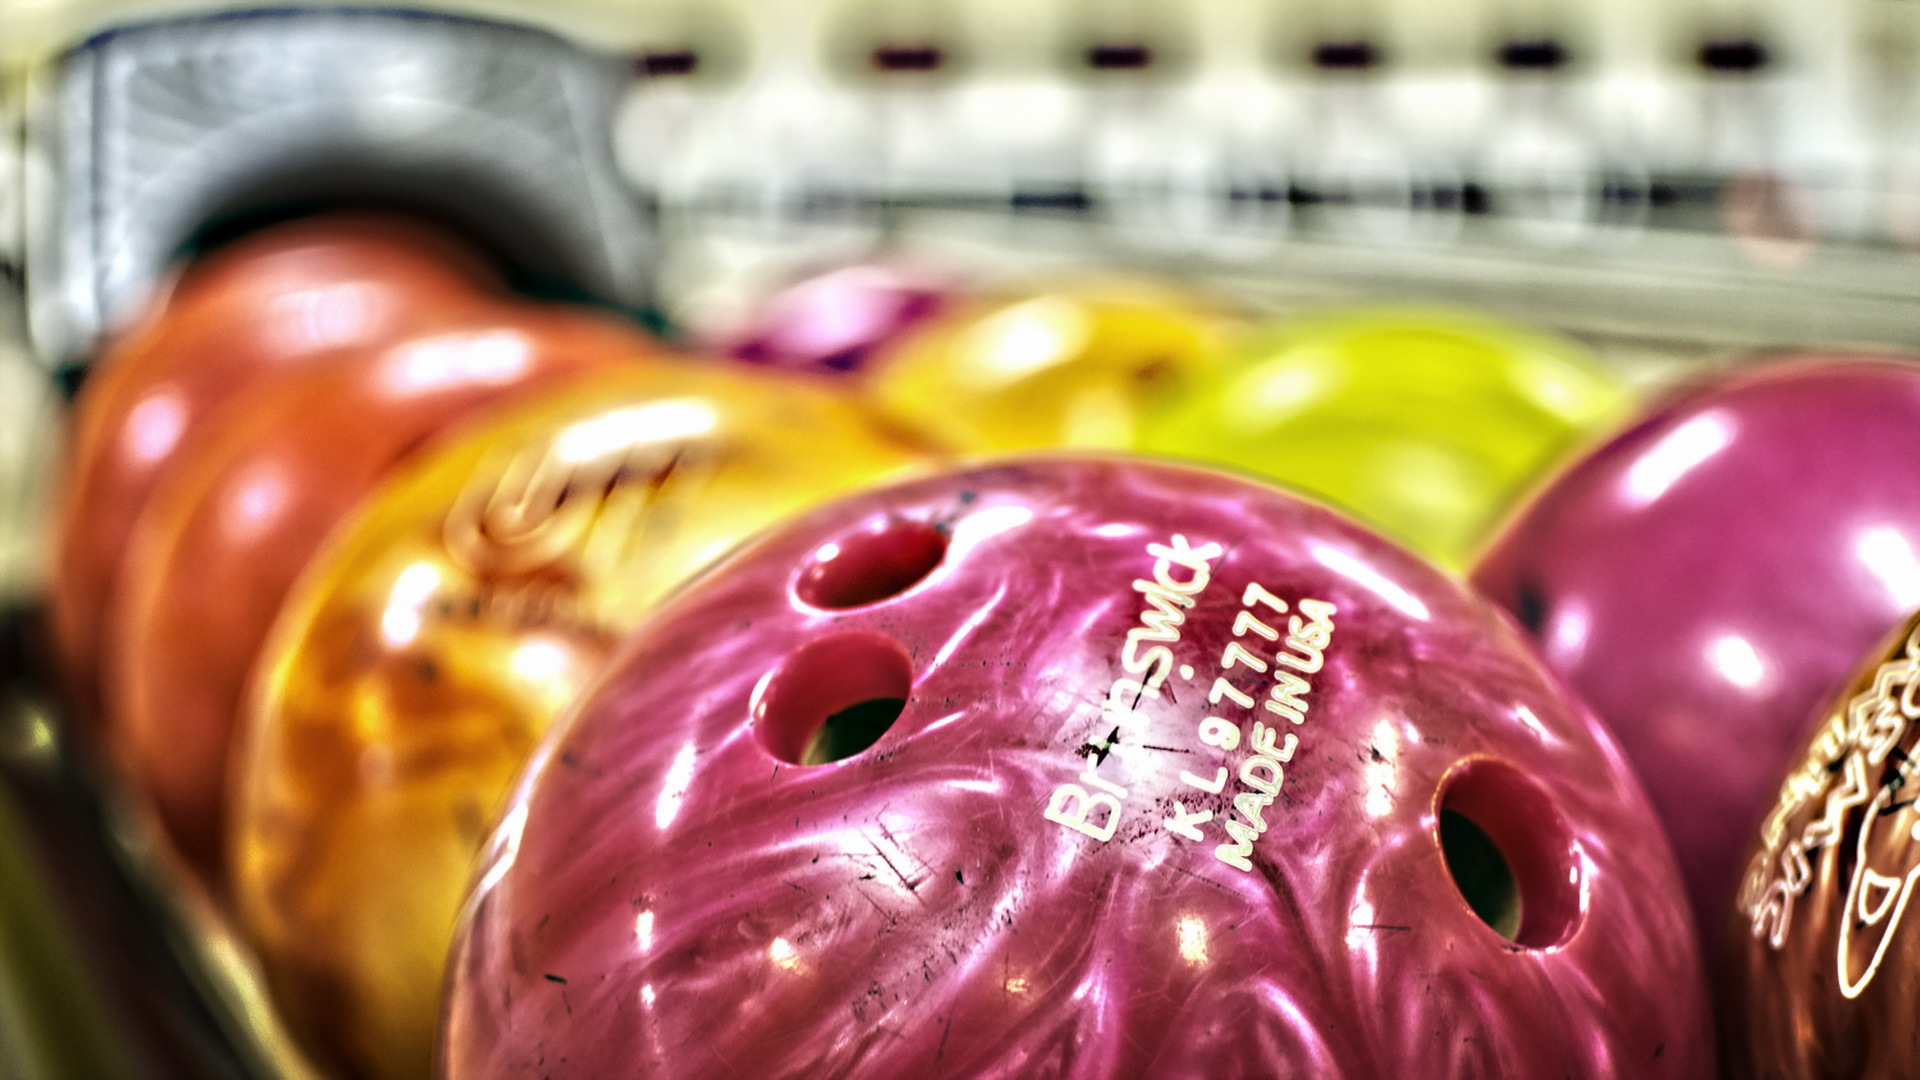 Wallpaper, food, sport, pink, ball, bowling, color 1920x1080